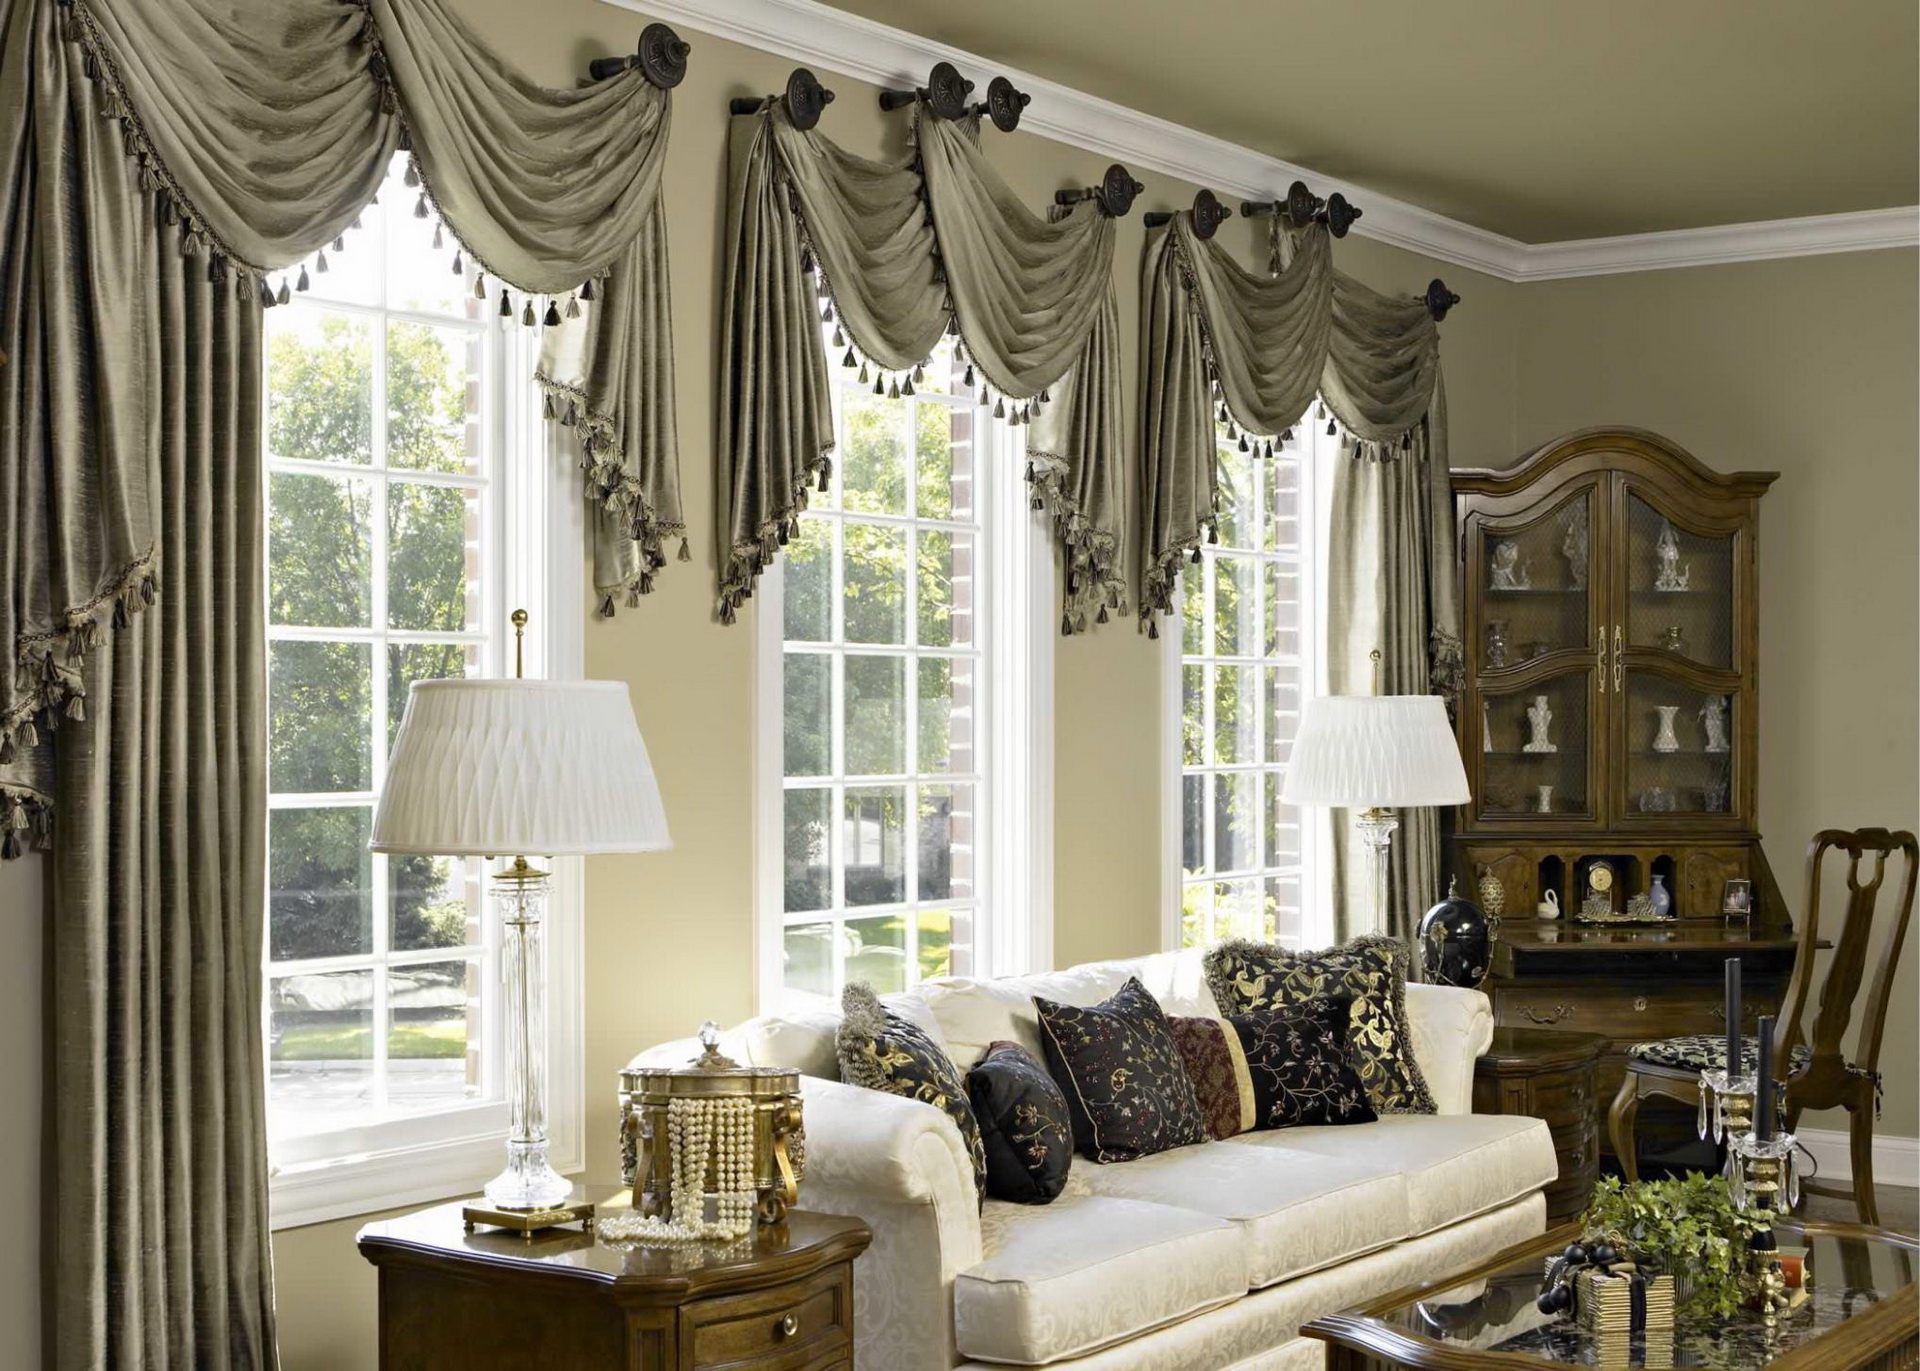 Living Room Curtains Ideas: Creative Ways To Transform Your Space